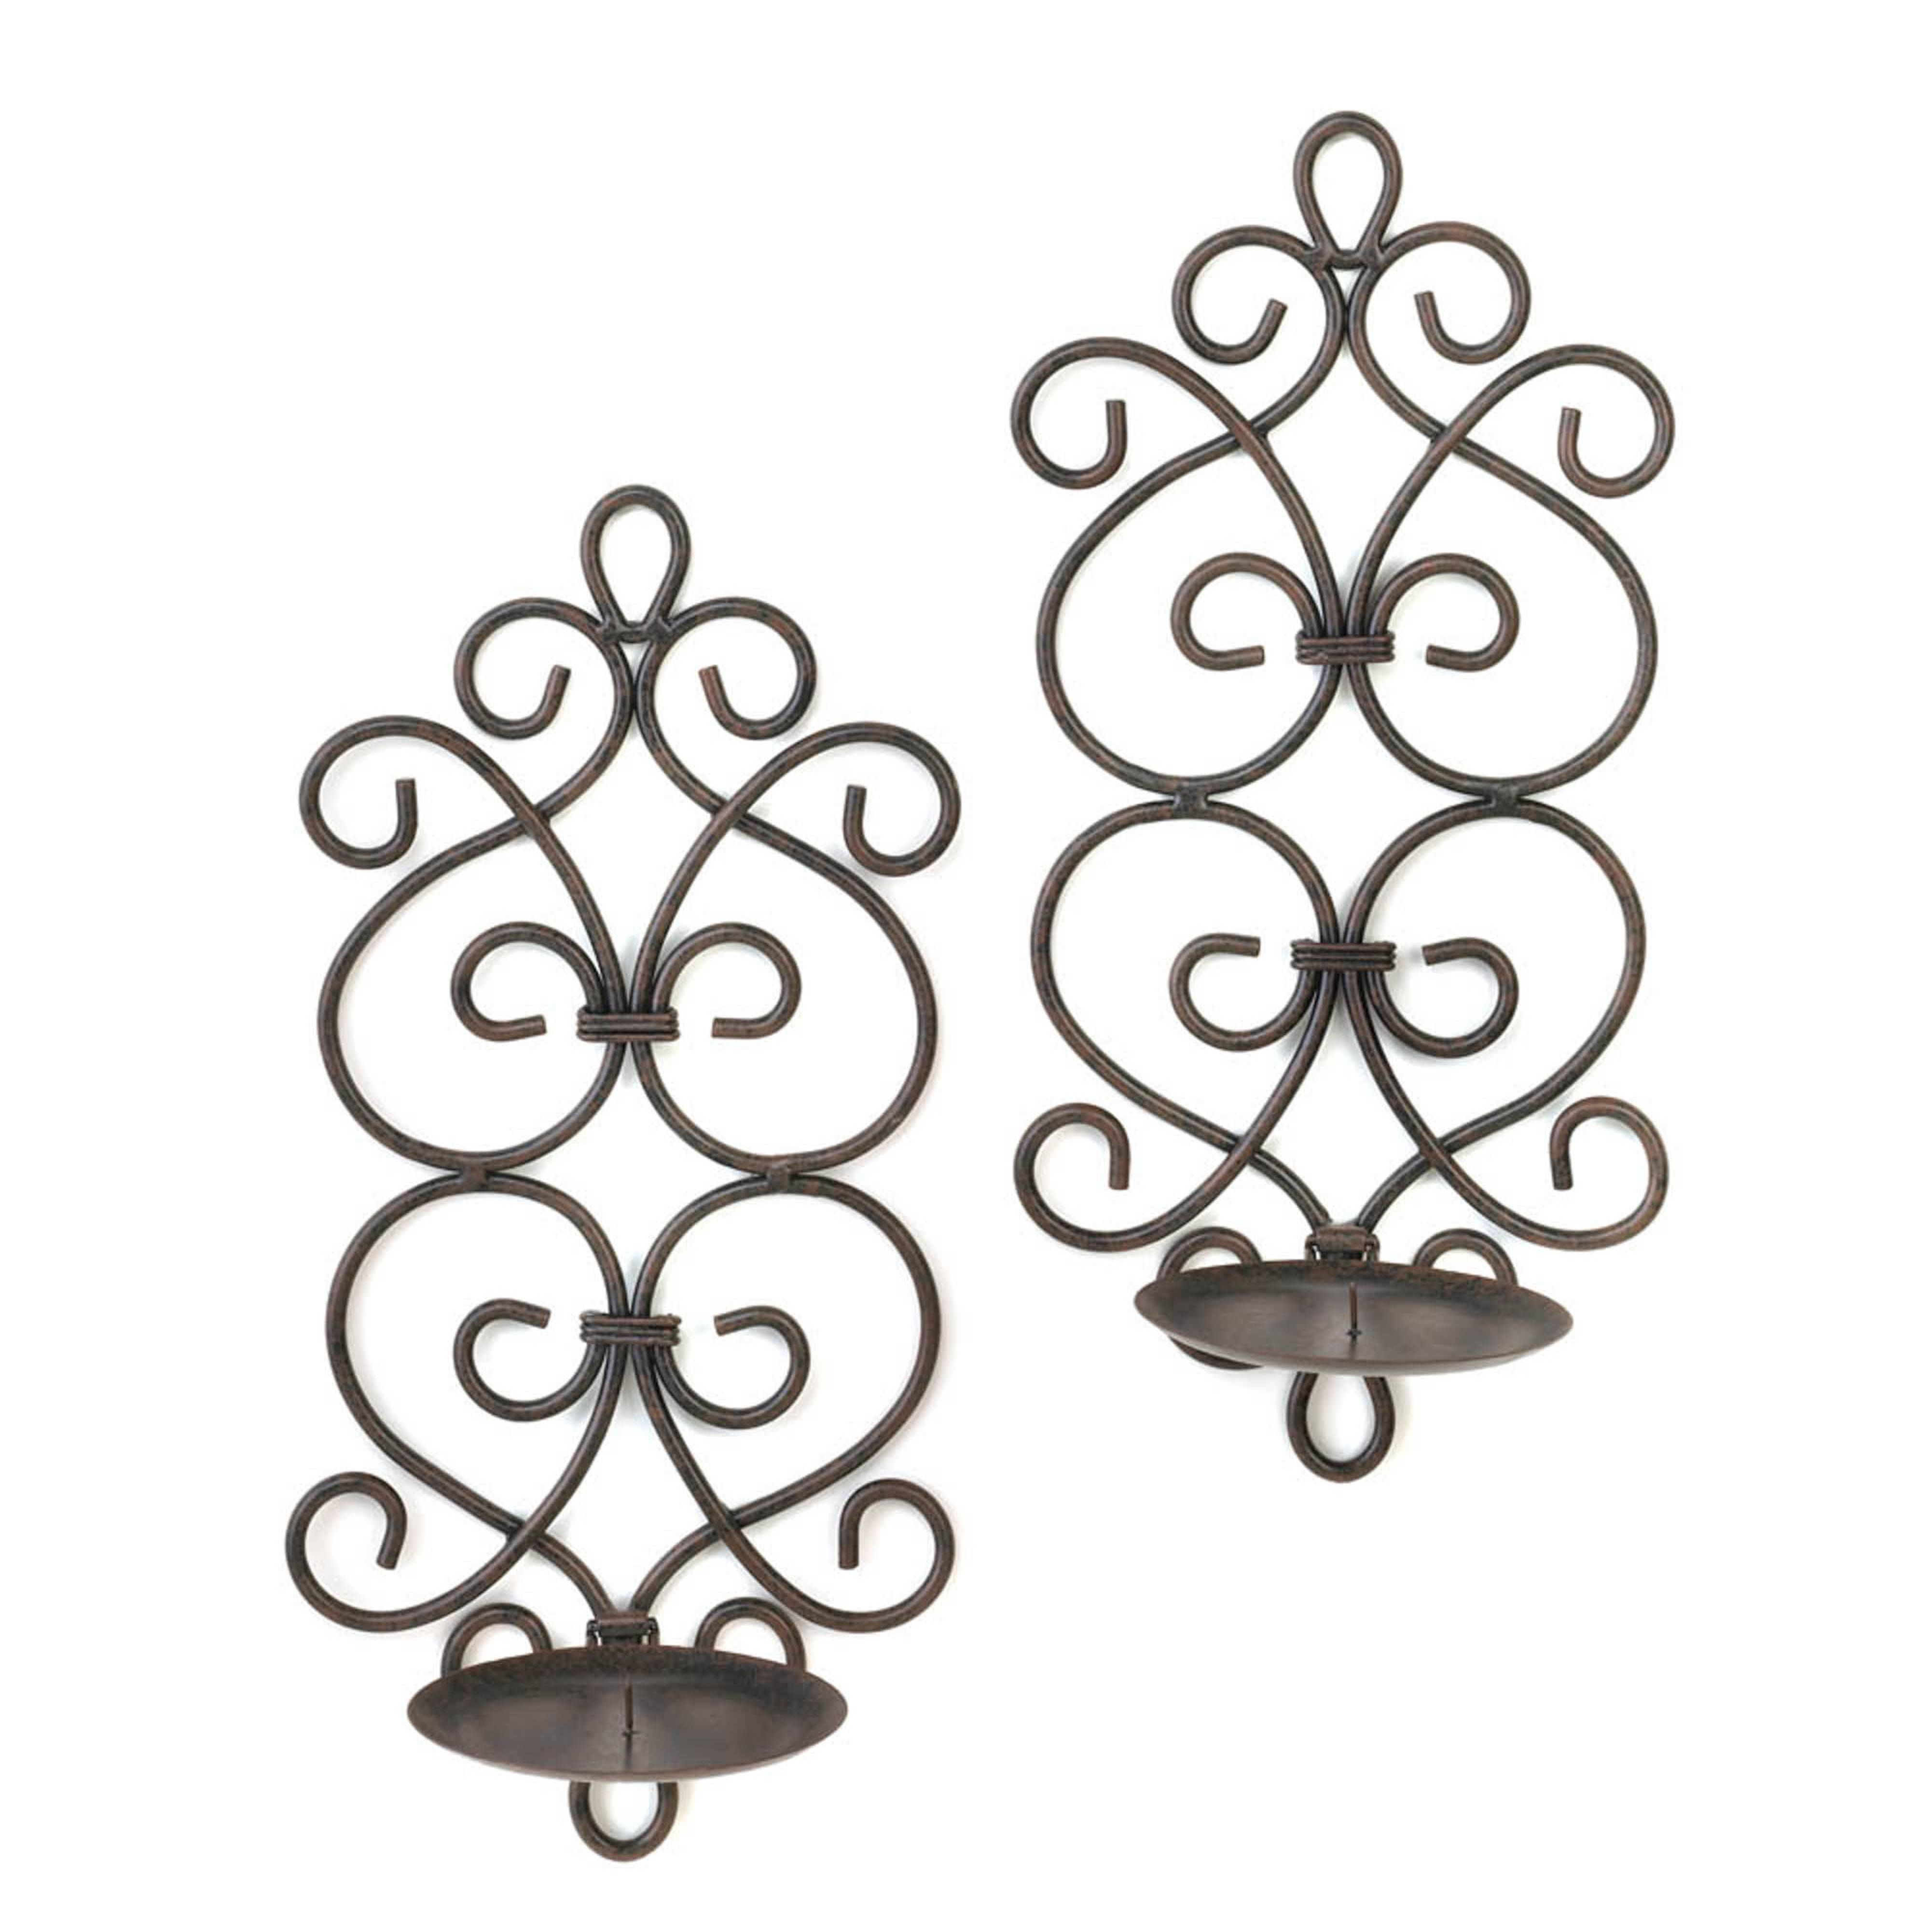 13" Metal Scrollwork Candle Wall Sconces, 2ct.